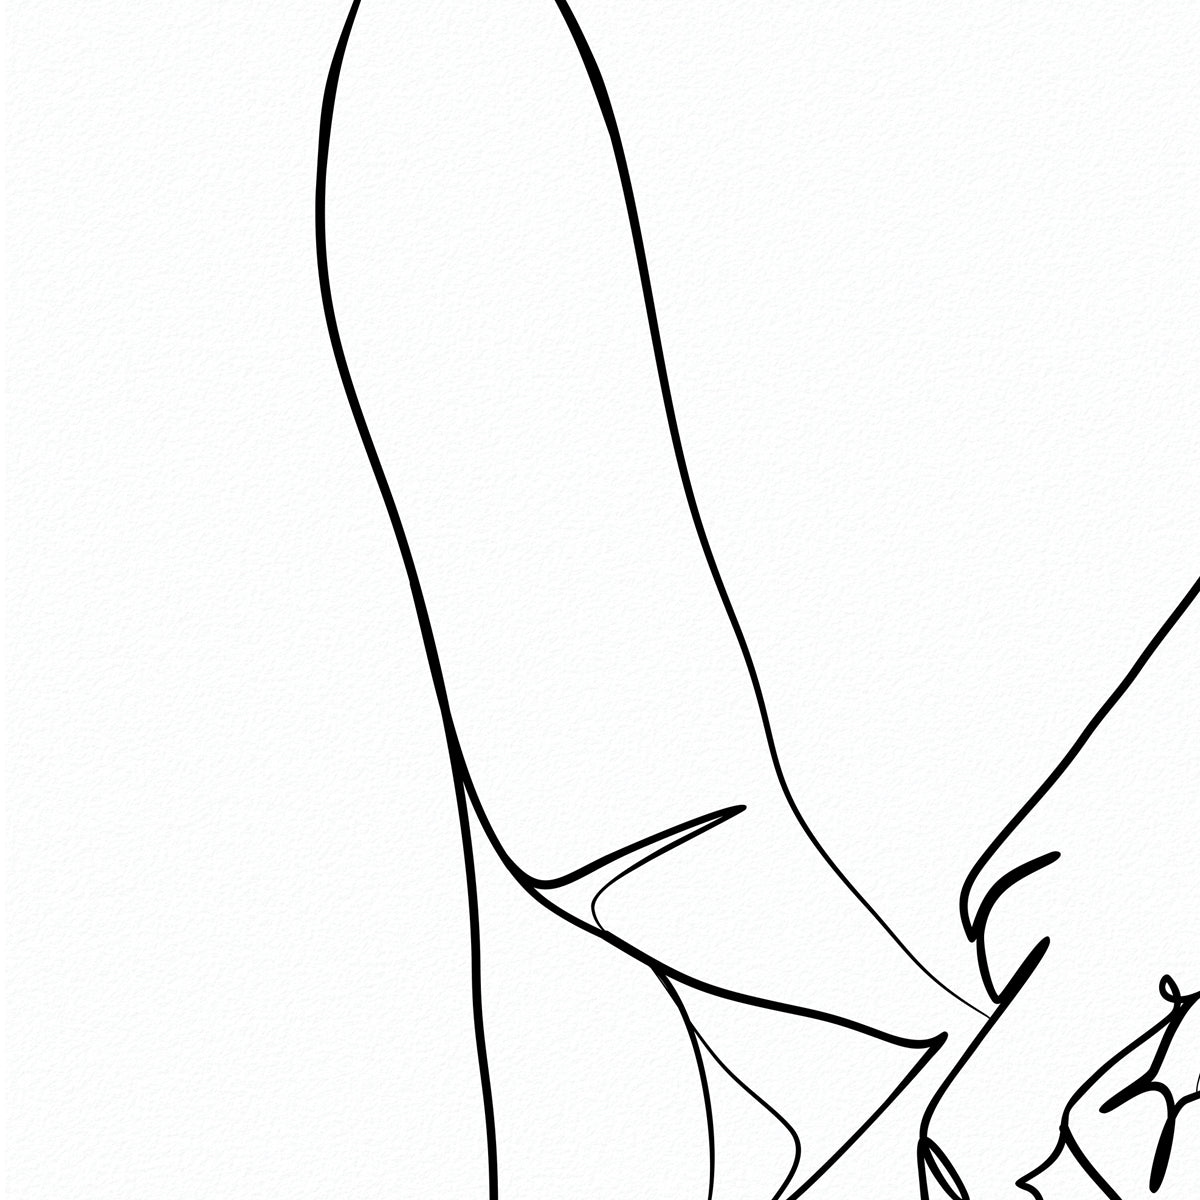 United by Love - One-Line Art of Male Couple Holding Hands - Giclee Art Print